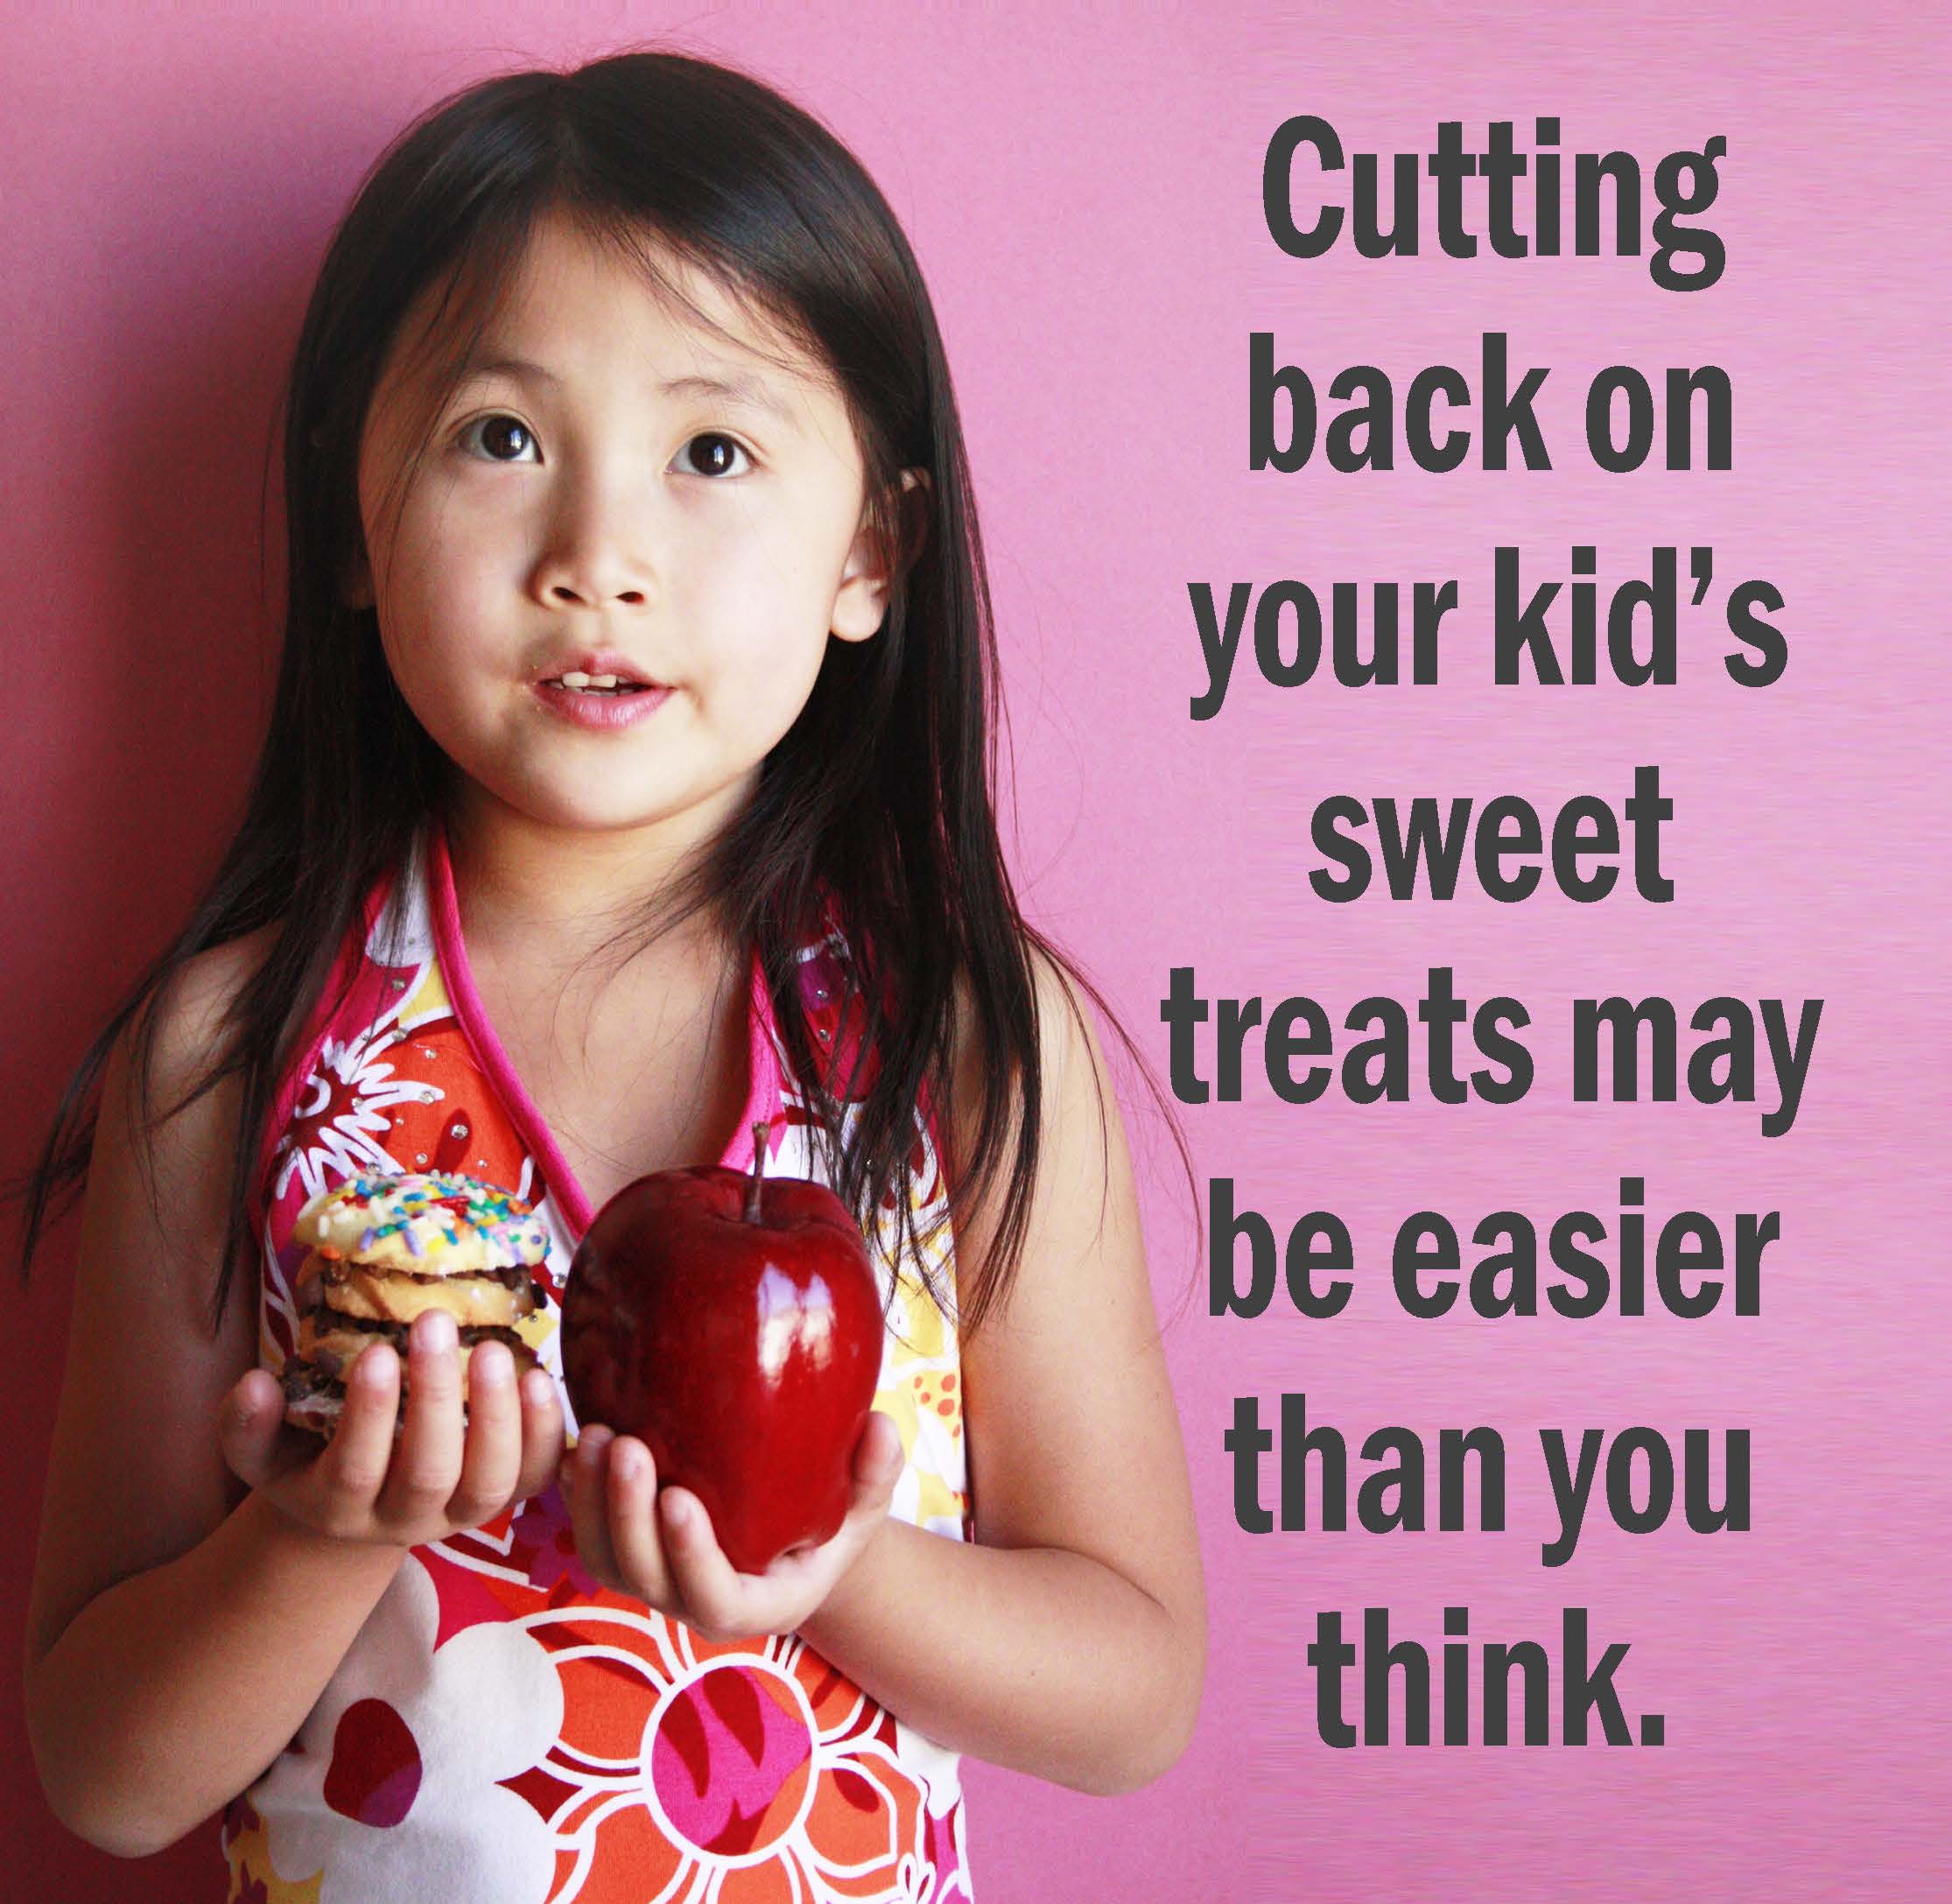 Cover photo of Ways to Reduce Sugar pdf. Young girl chooses between a stack of cookies in her left hand and an apple in her right.